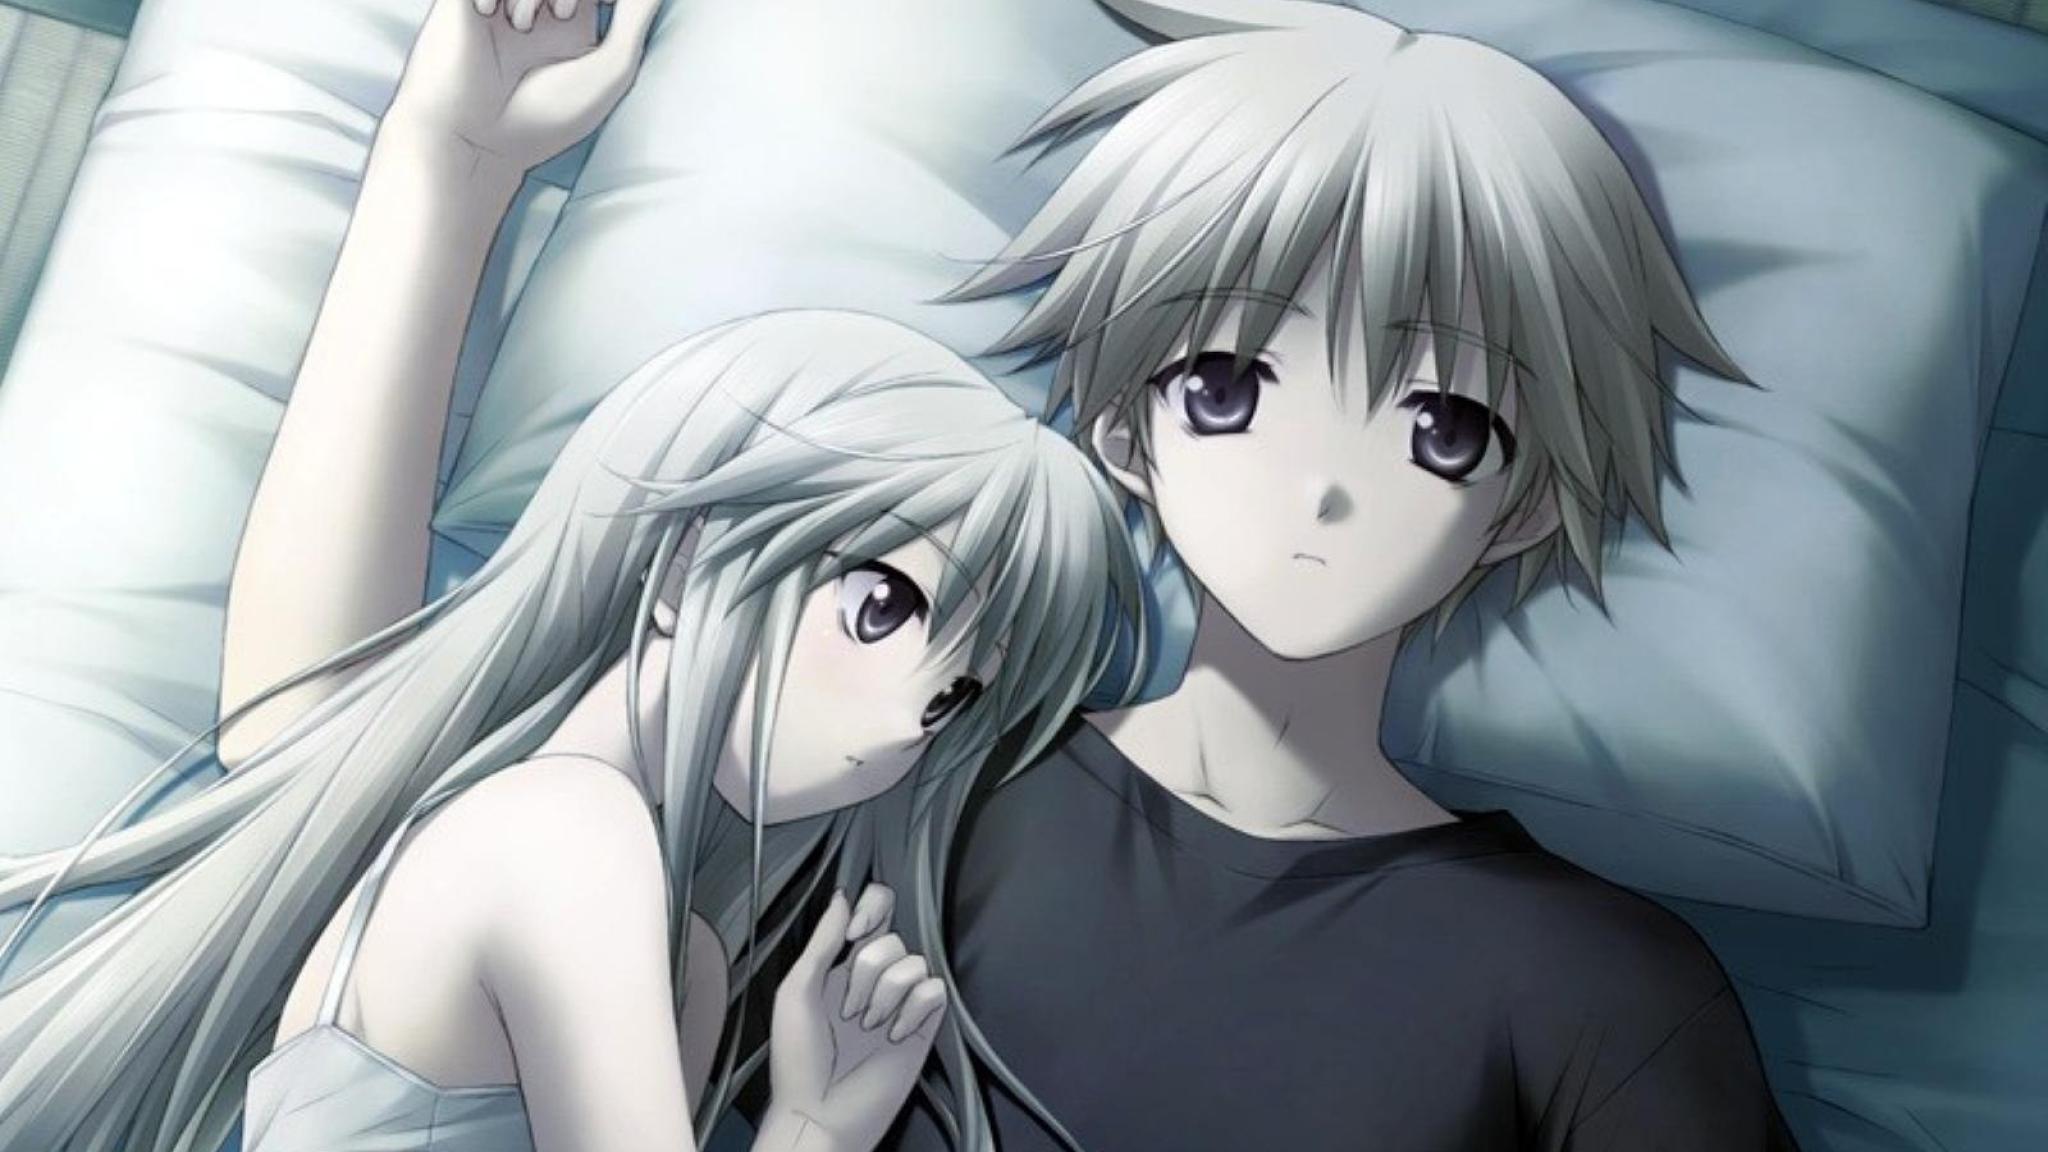 Sleeping Anime Couples Wallpapers  Wallpaper Cave